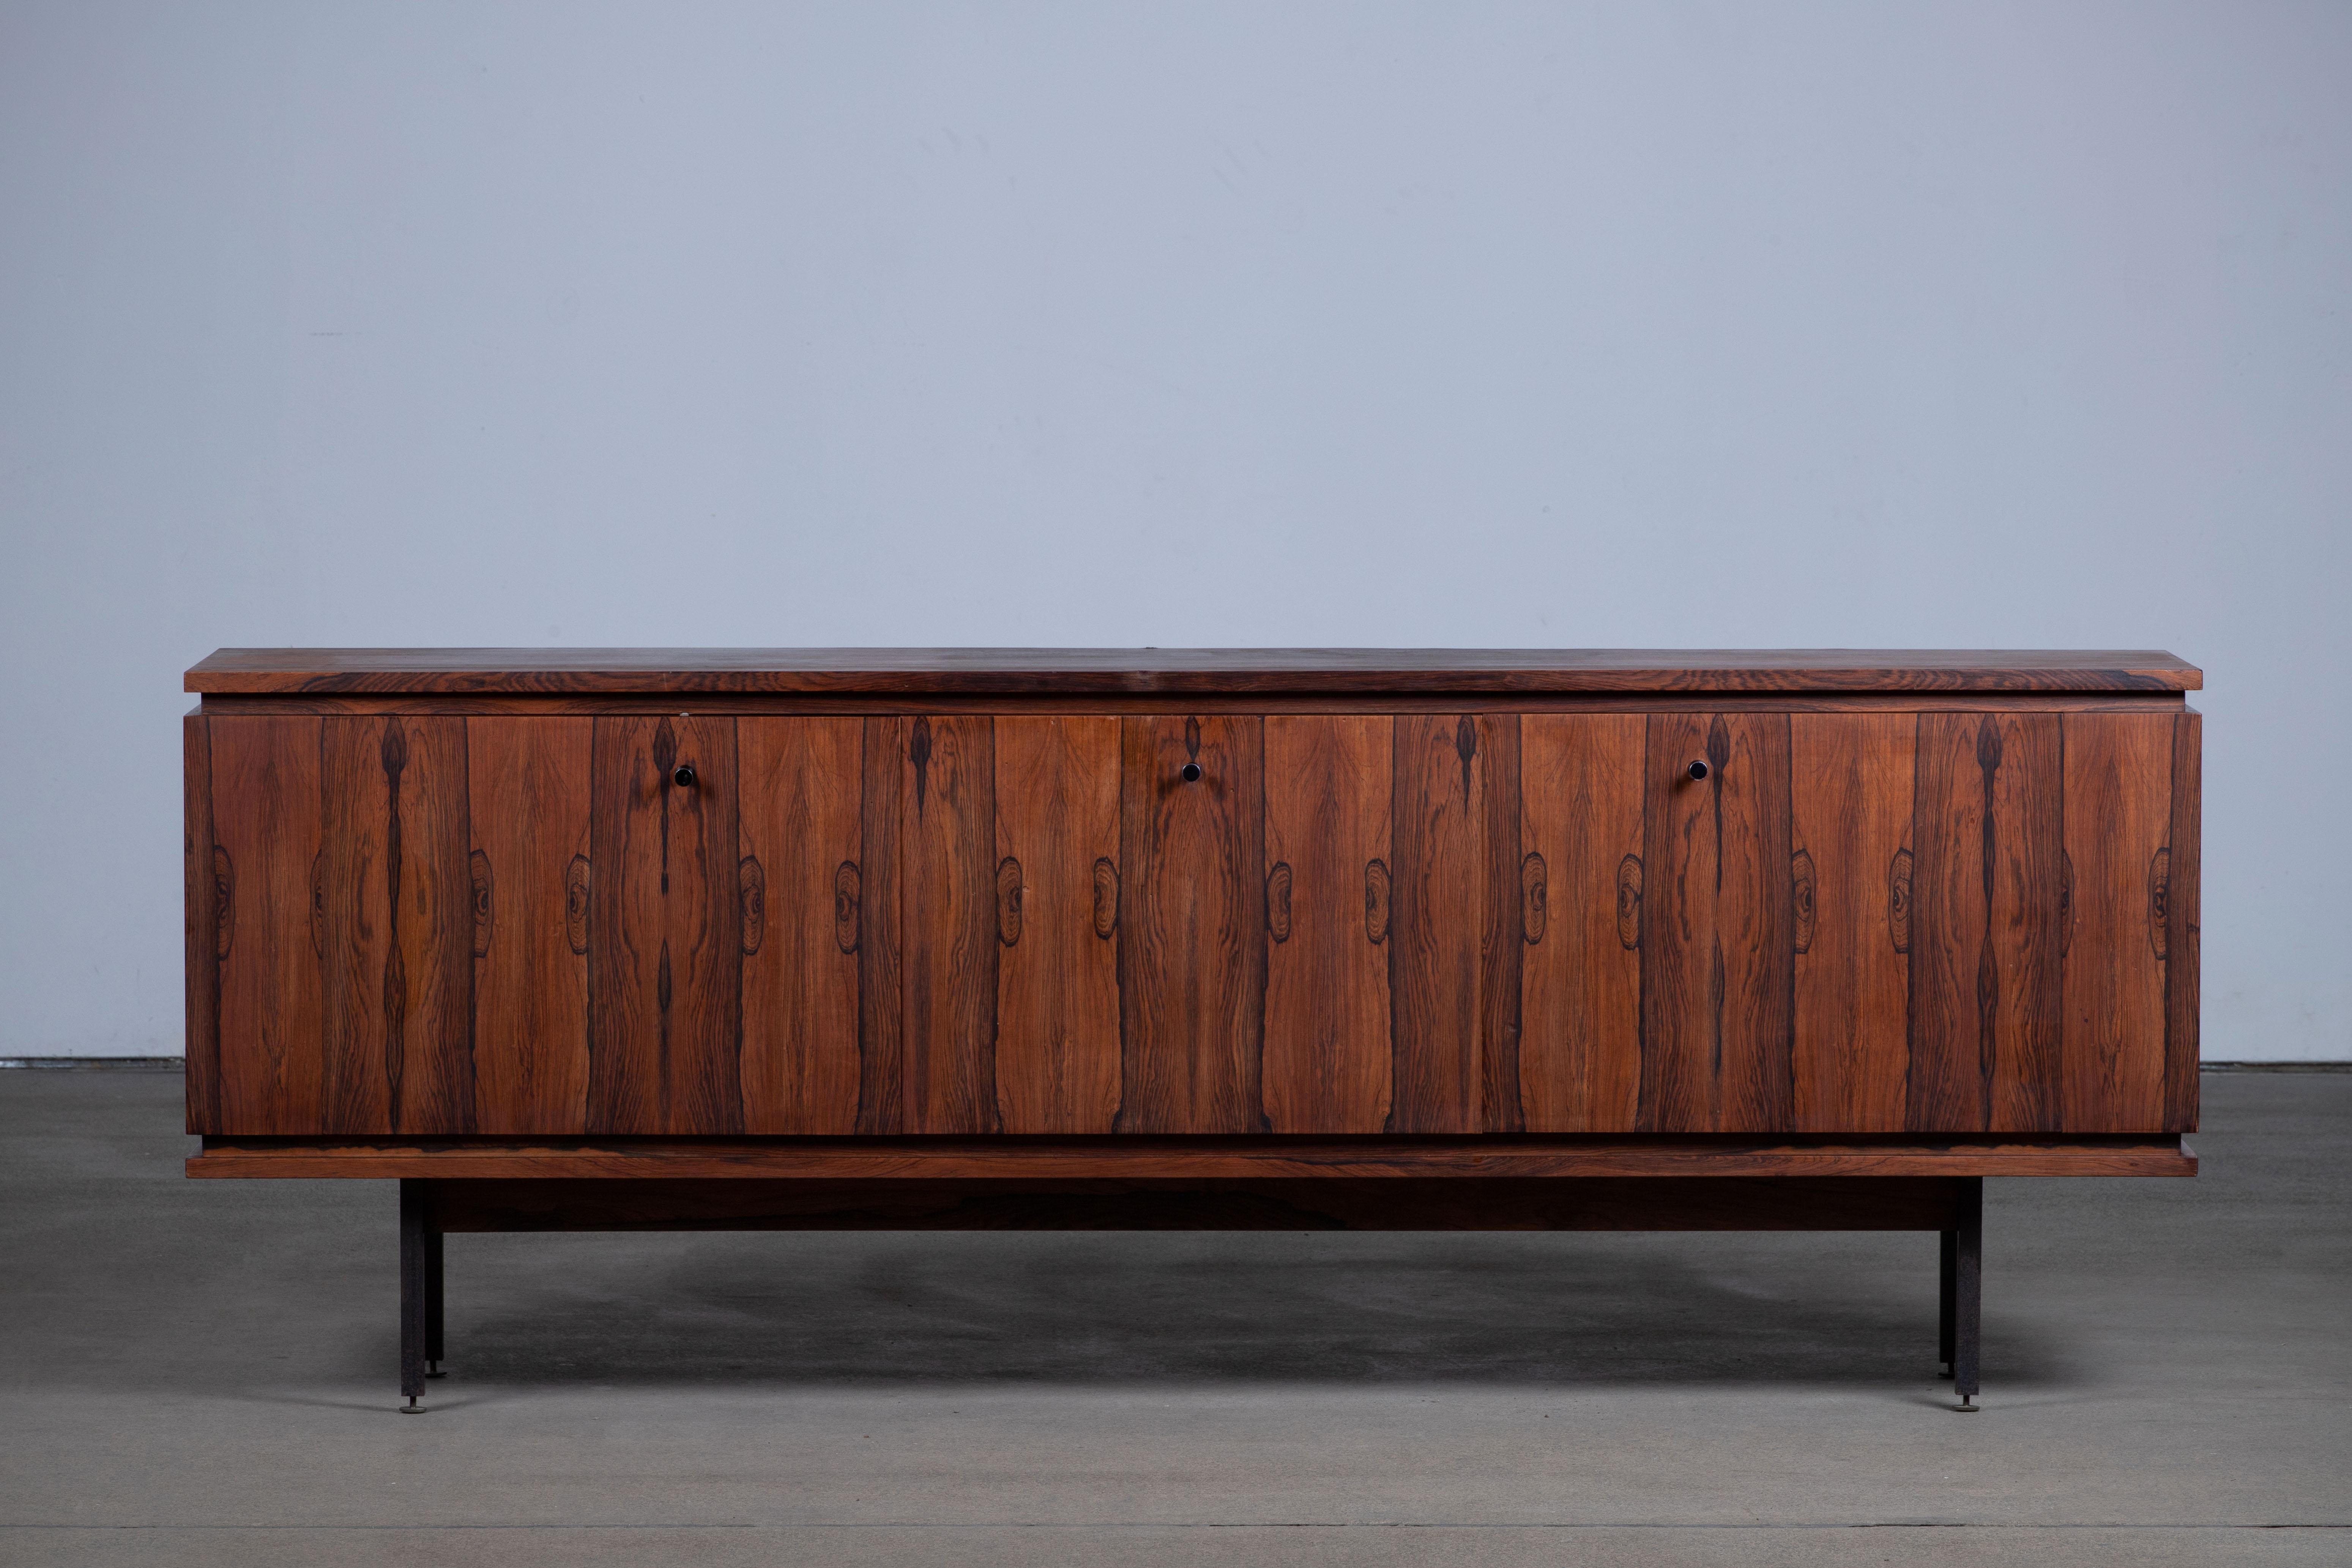 French MidCentury Modernist Sideboard, France, 1960s For Sale